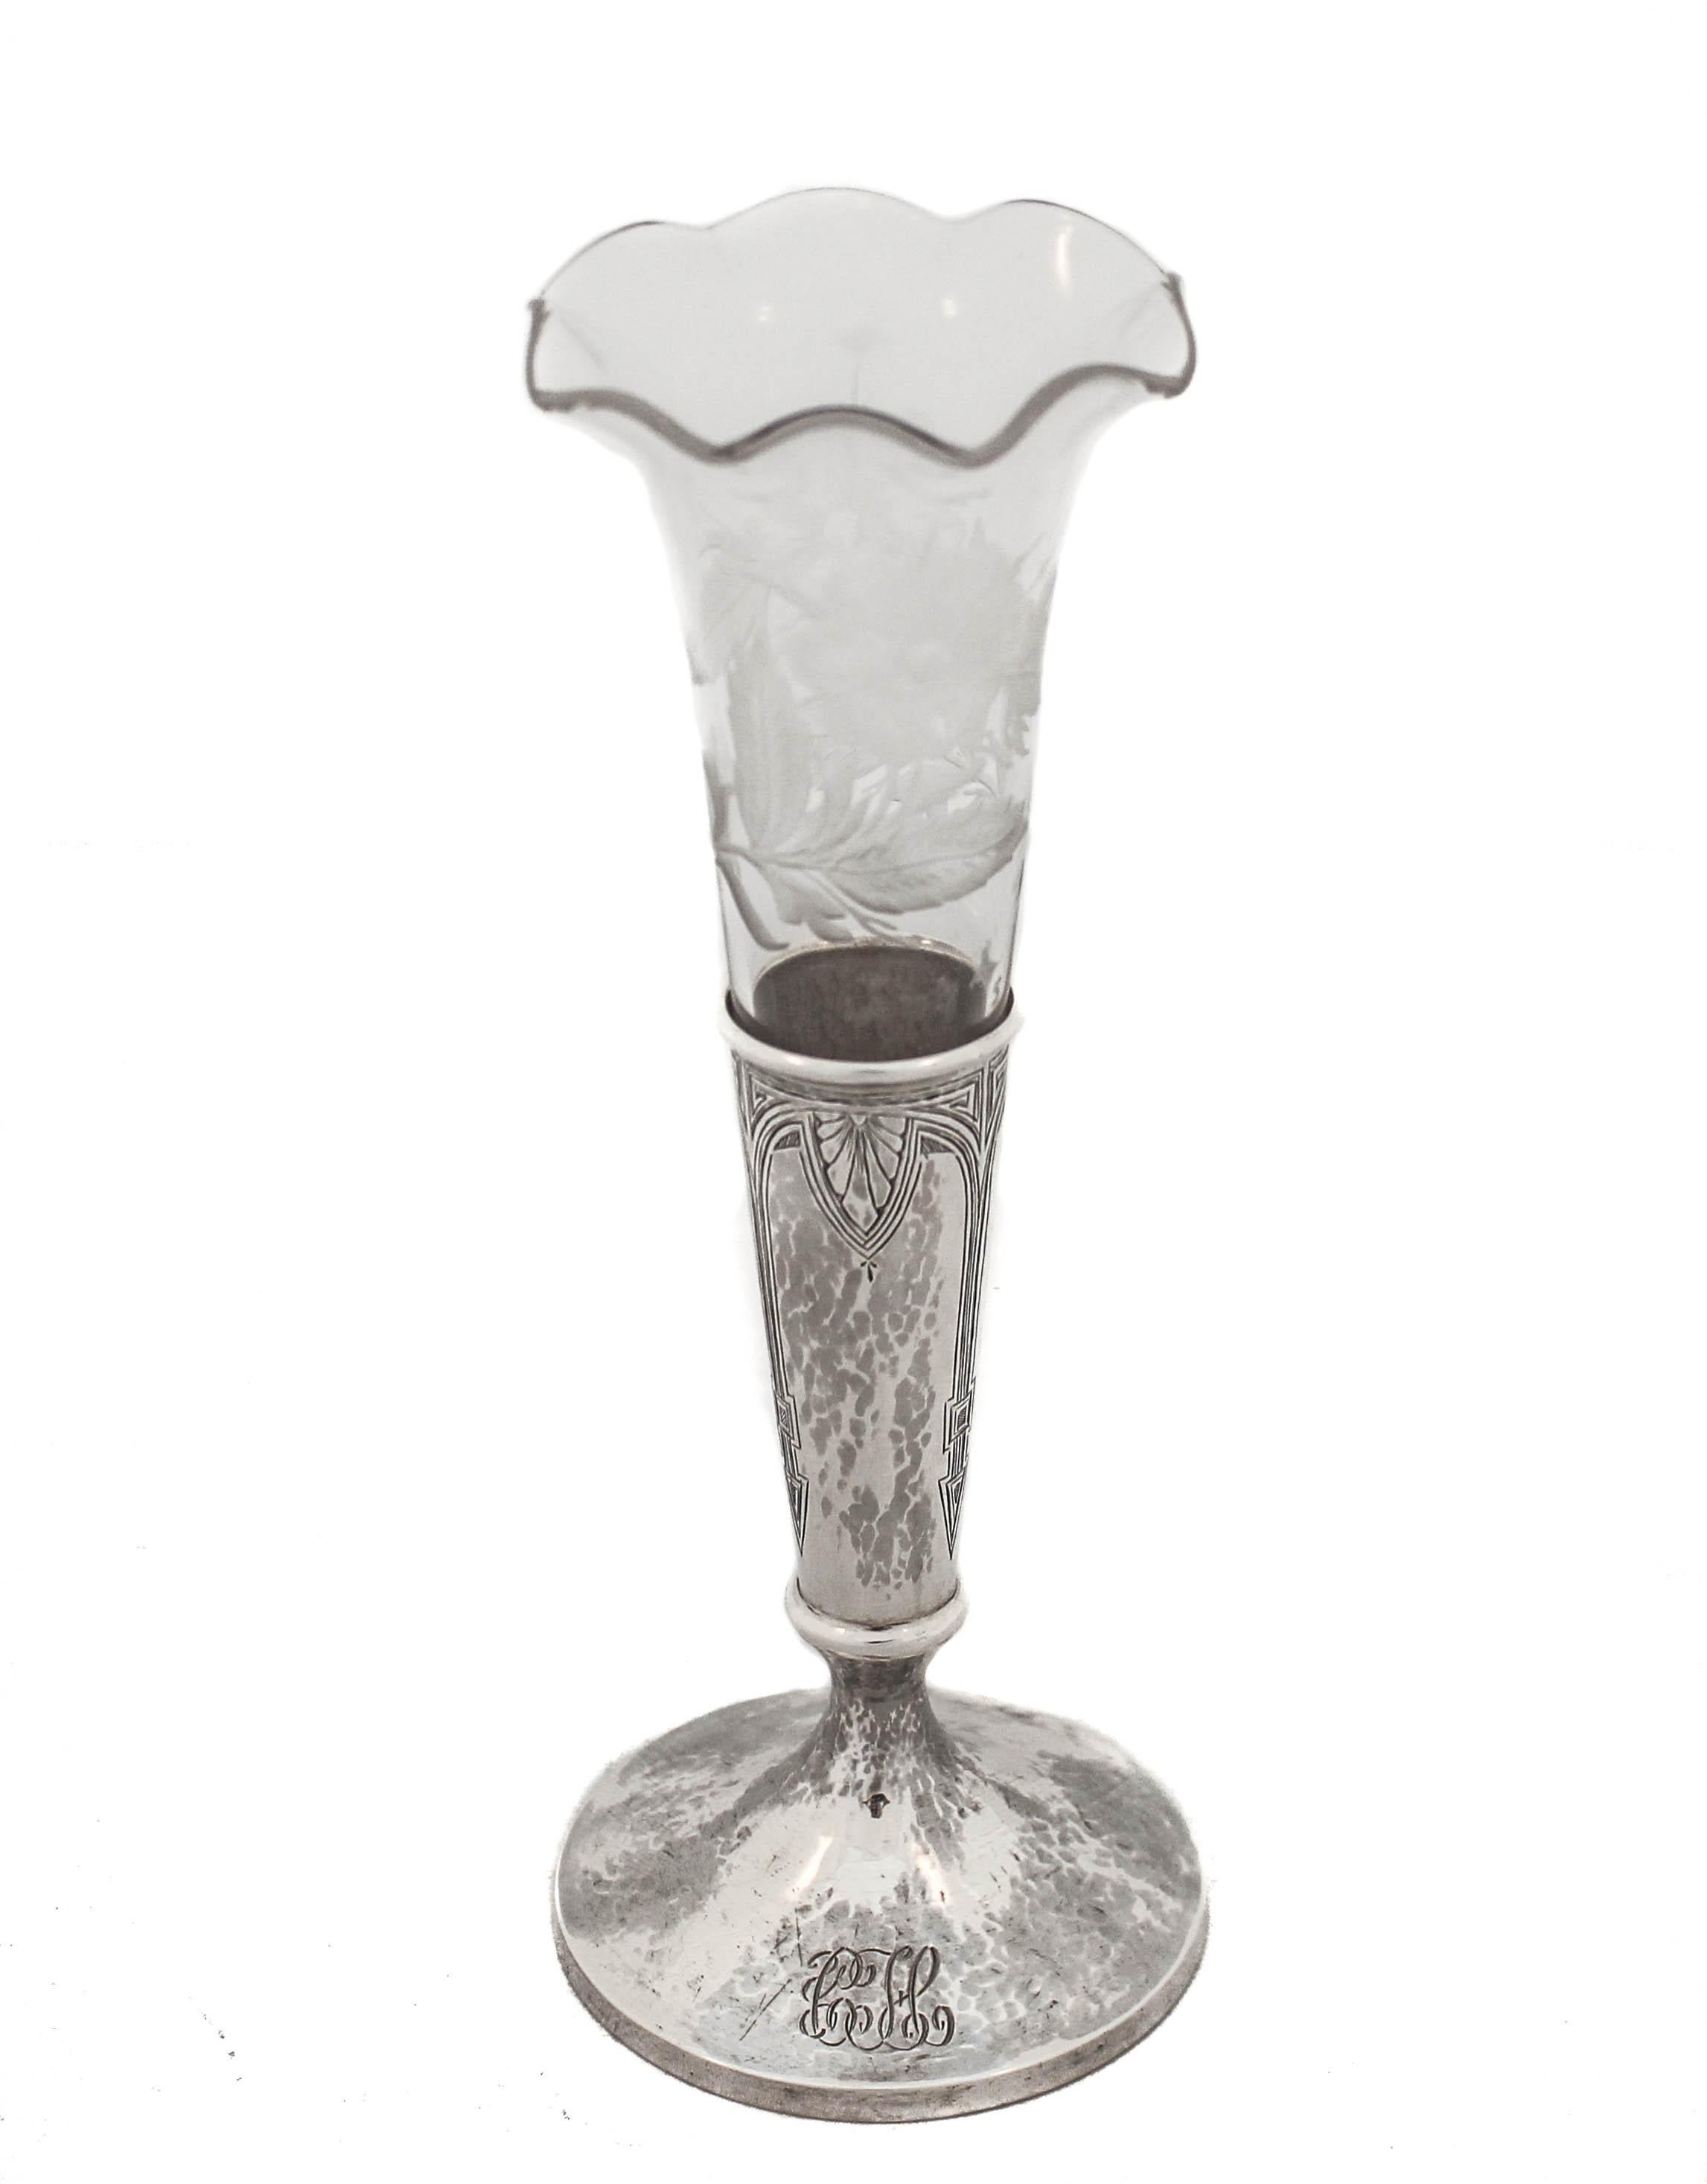 Being offered is a sterling silver bud vase with the original glass liner.  The silver vase is designed in the Art Deco style with symmetrical motifs.  The glass liner is scalloped and has acid-etched flowers and leaves all around.  This piece would